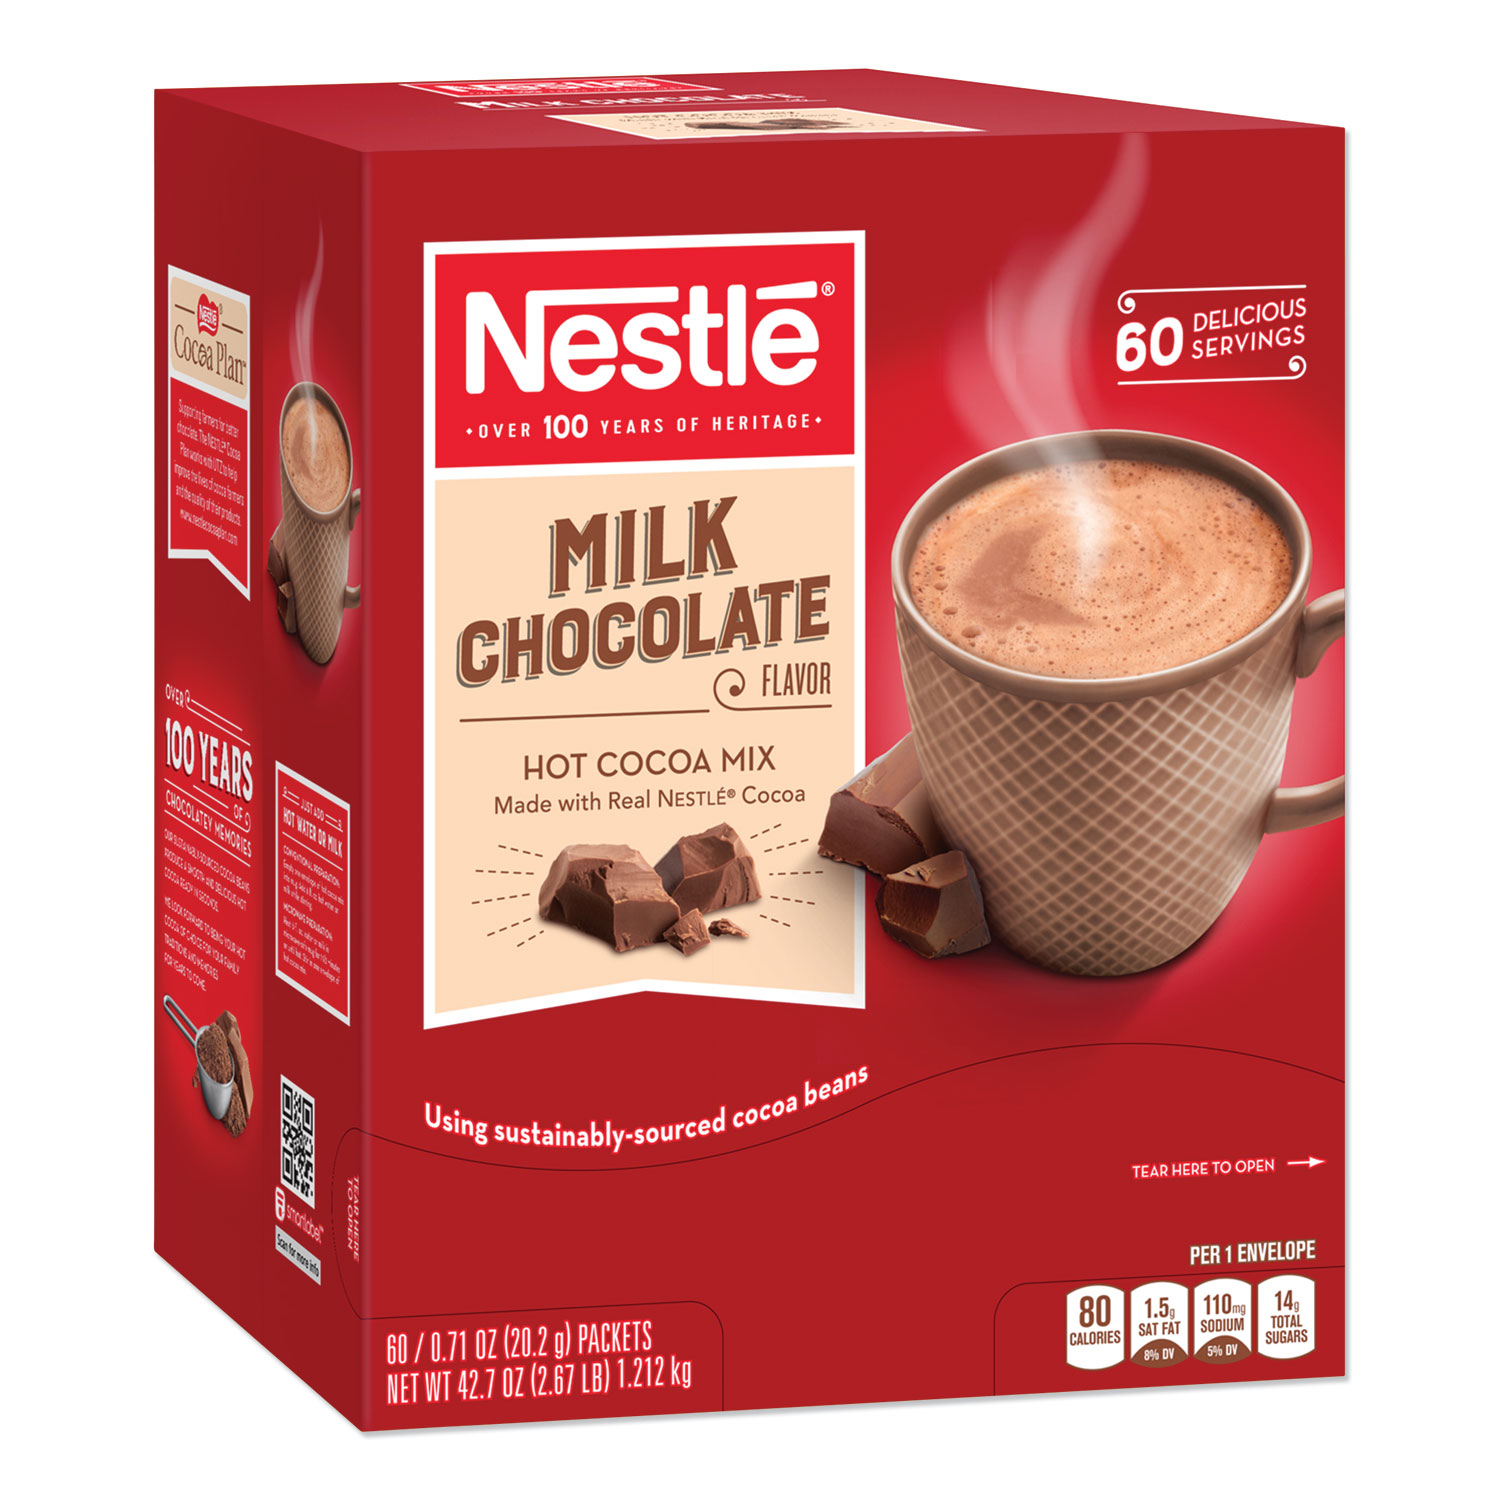 Nestlé® Hot Cocoa Mix, Milk Chocolate, 0.71 oz Packet, 60 Packets/Box